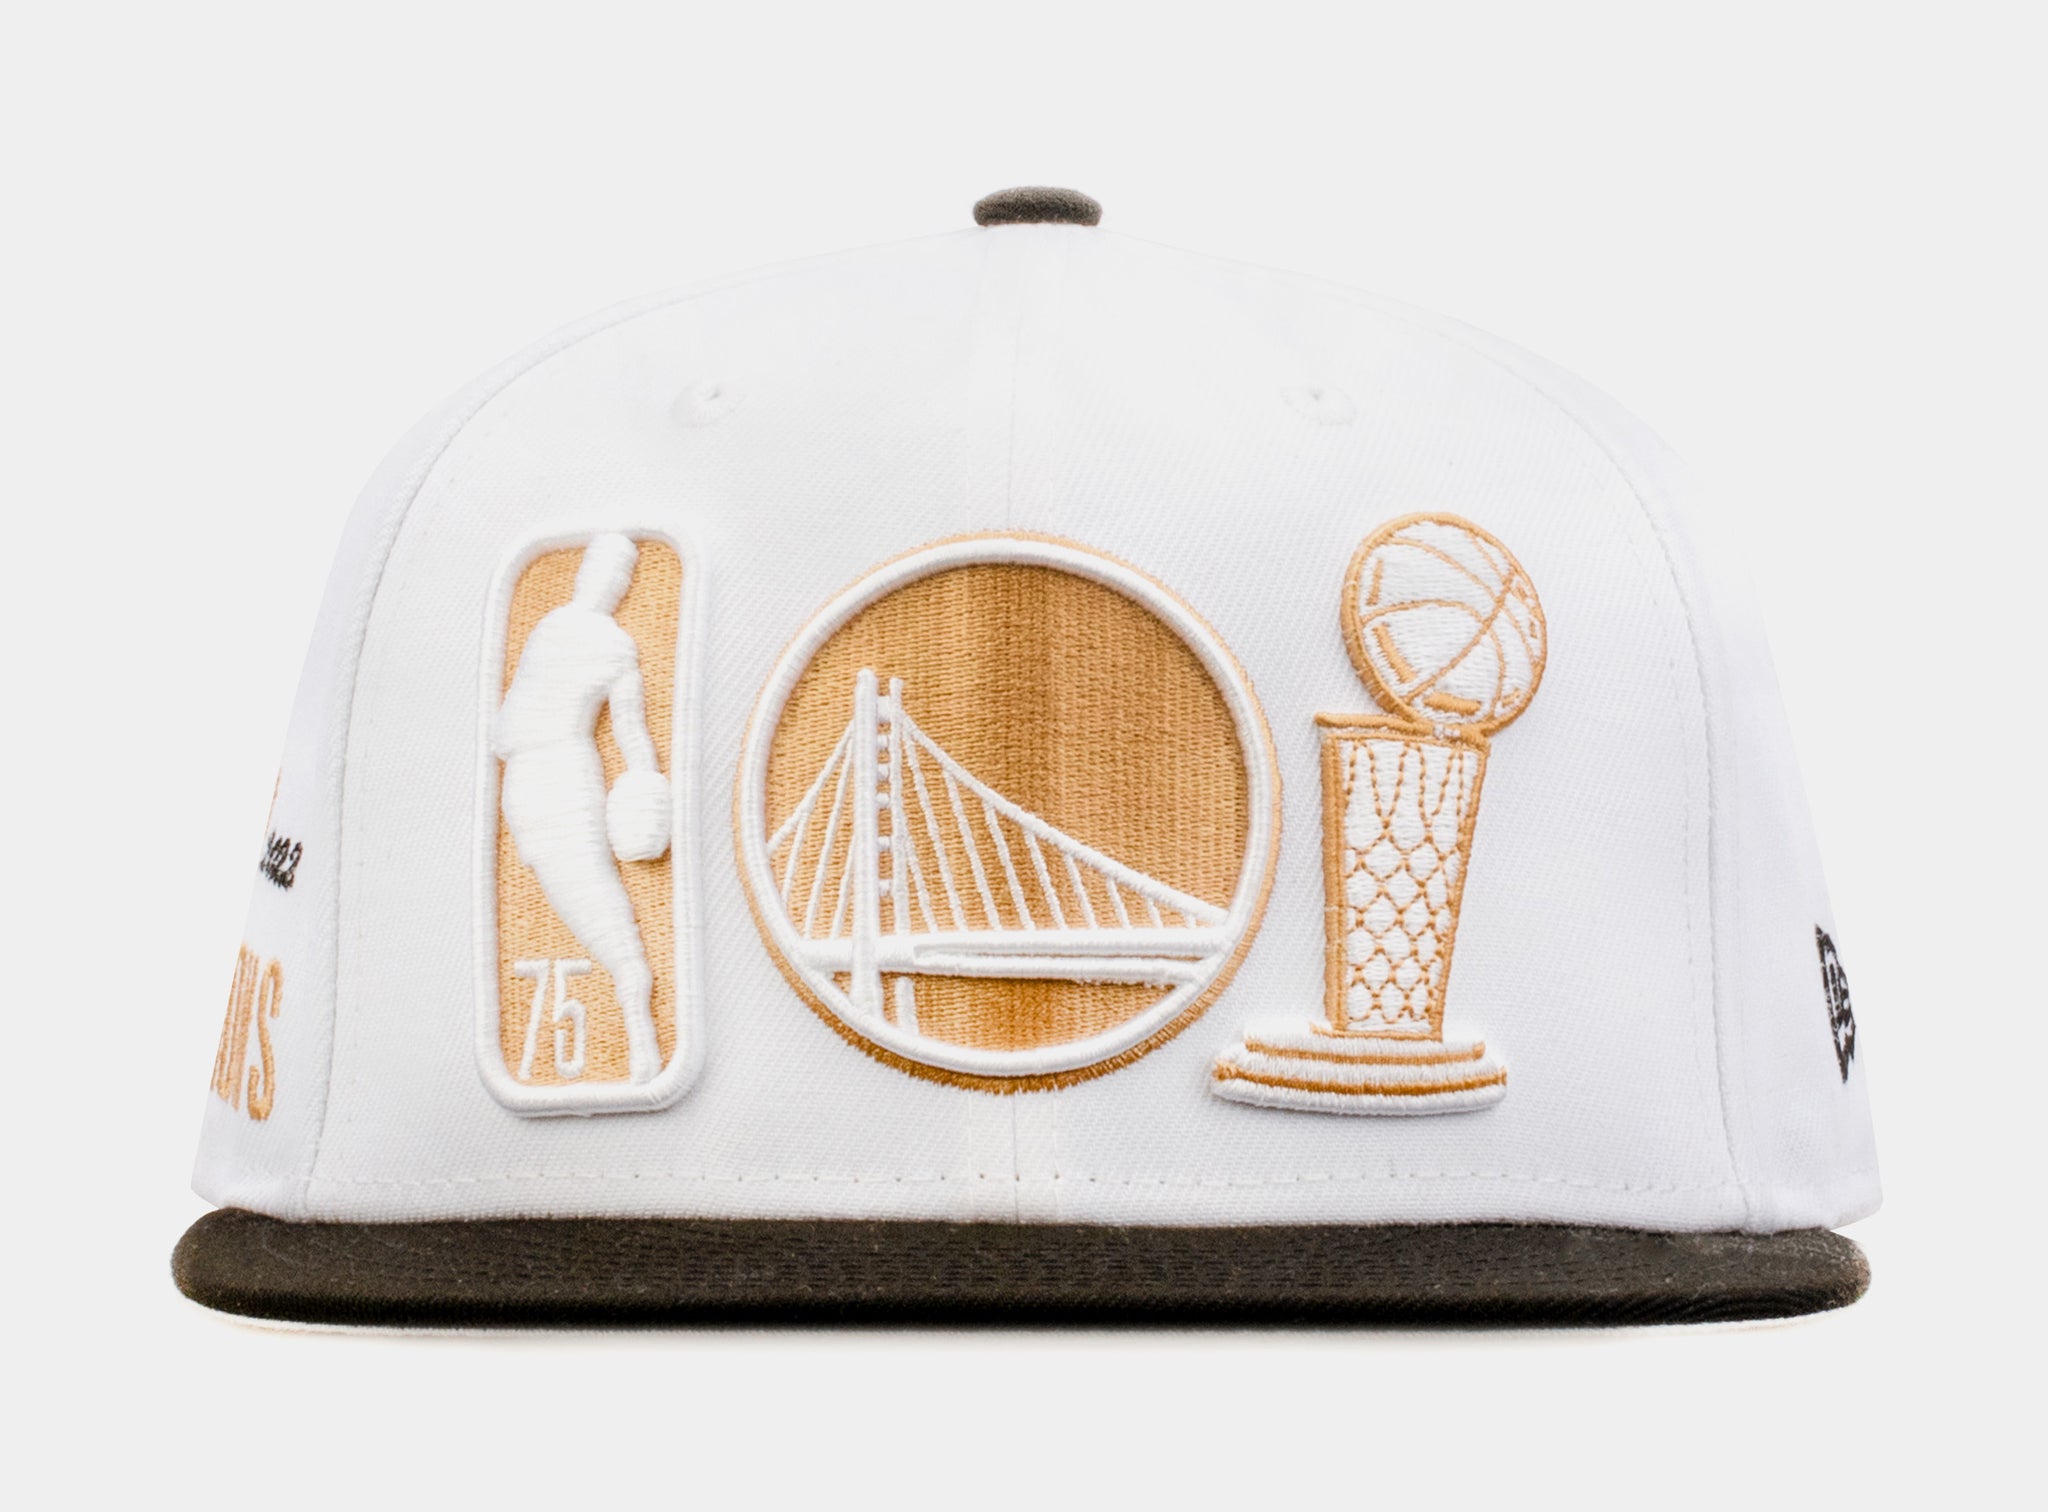 2022 Golden State Warriors Champions Hats for Sale in San